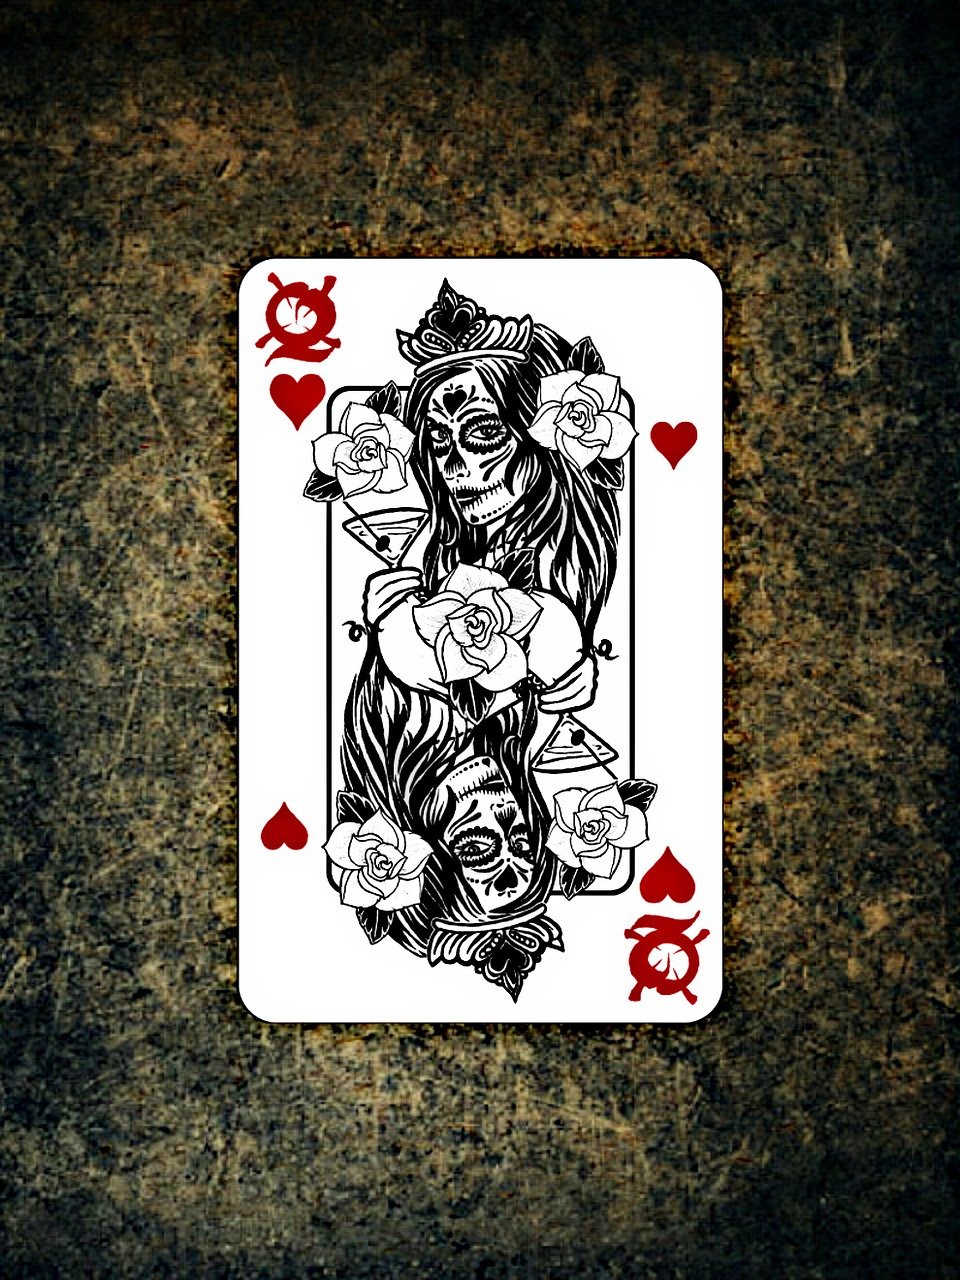 background image, playing card, skull and crossbones-762791.jpg